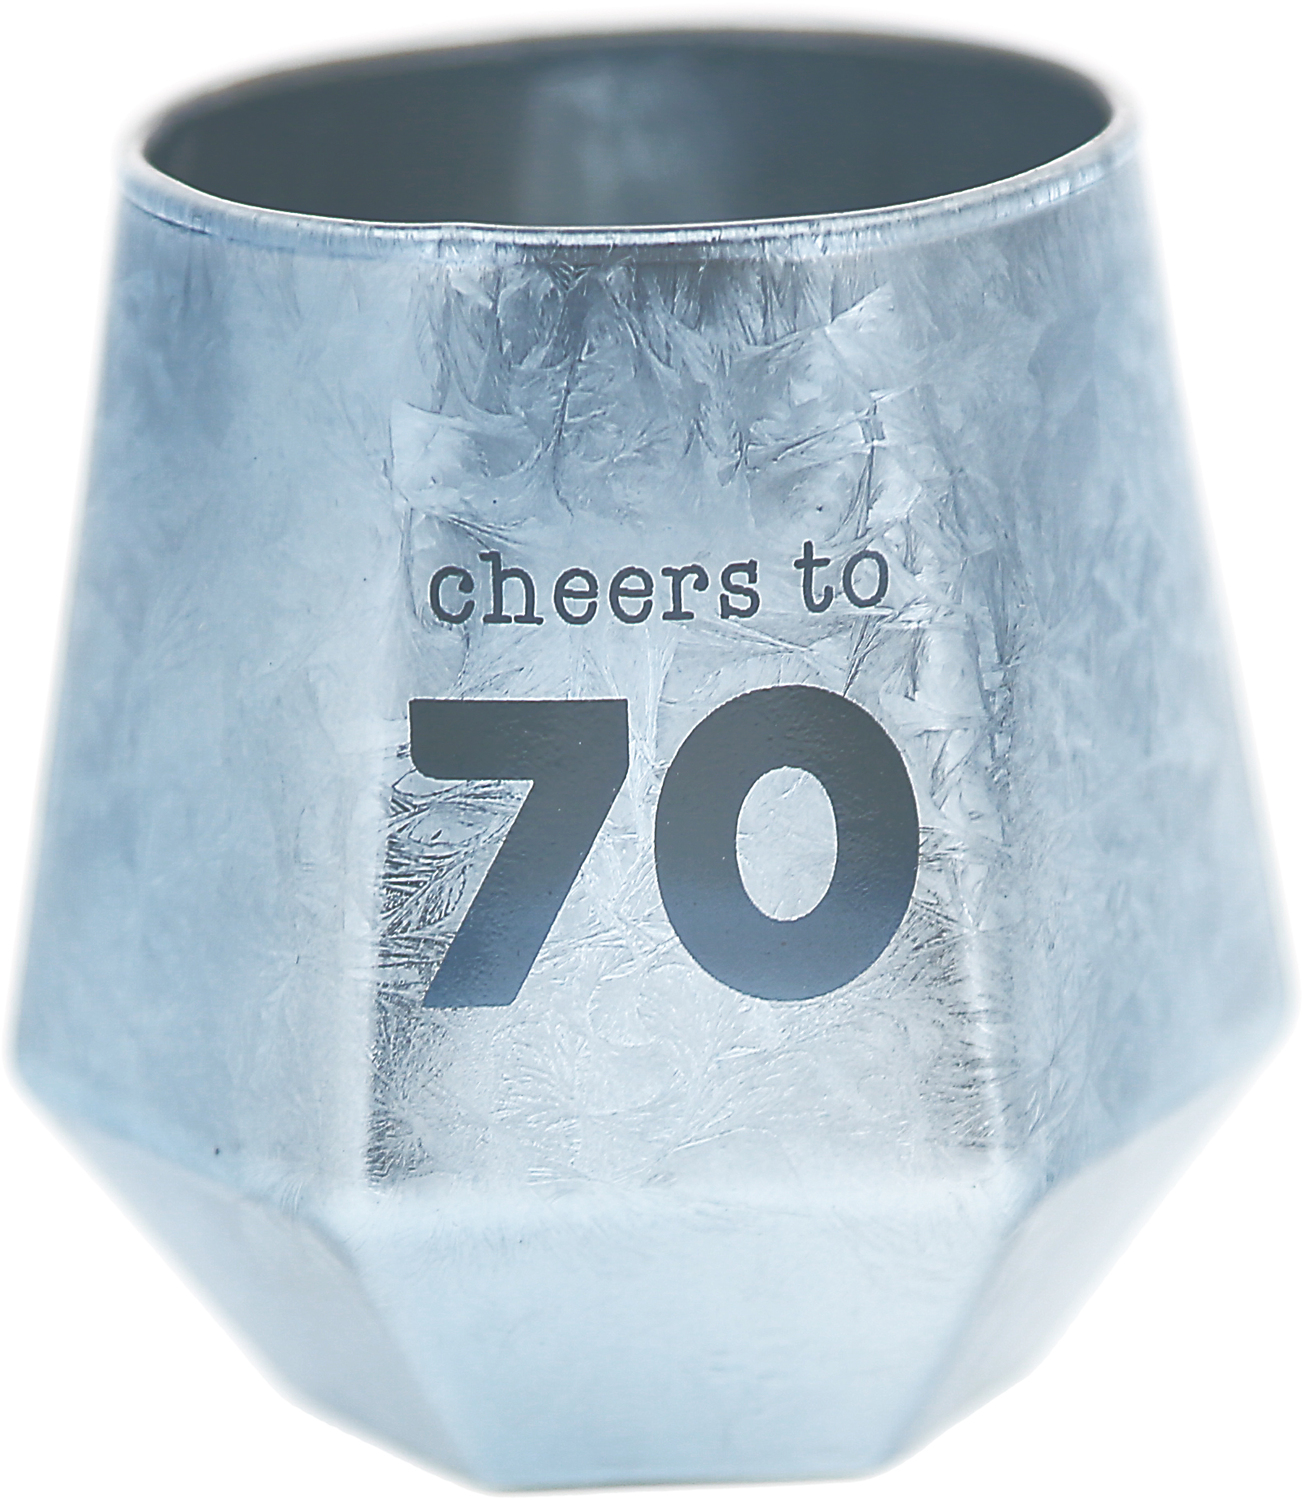 Cheers to 70 by Happy Confetti to You - Cheers to 70 - 3 oz Geometric Shot Glass